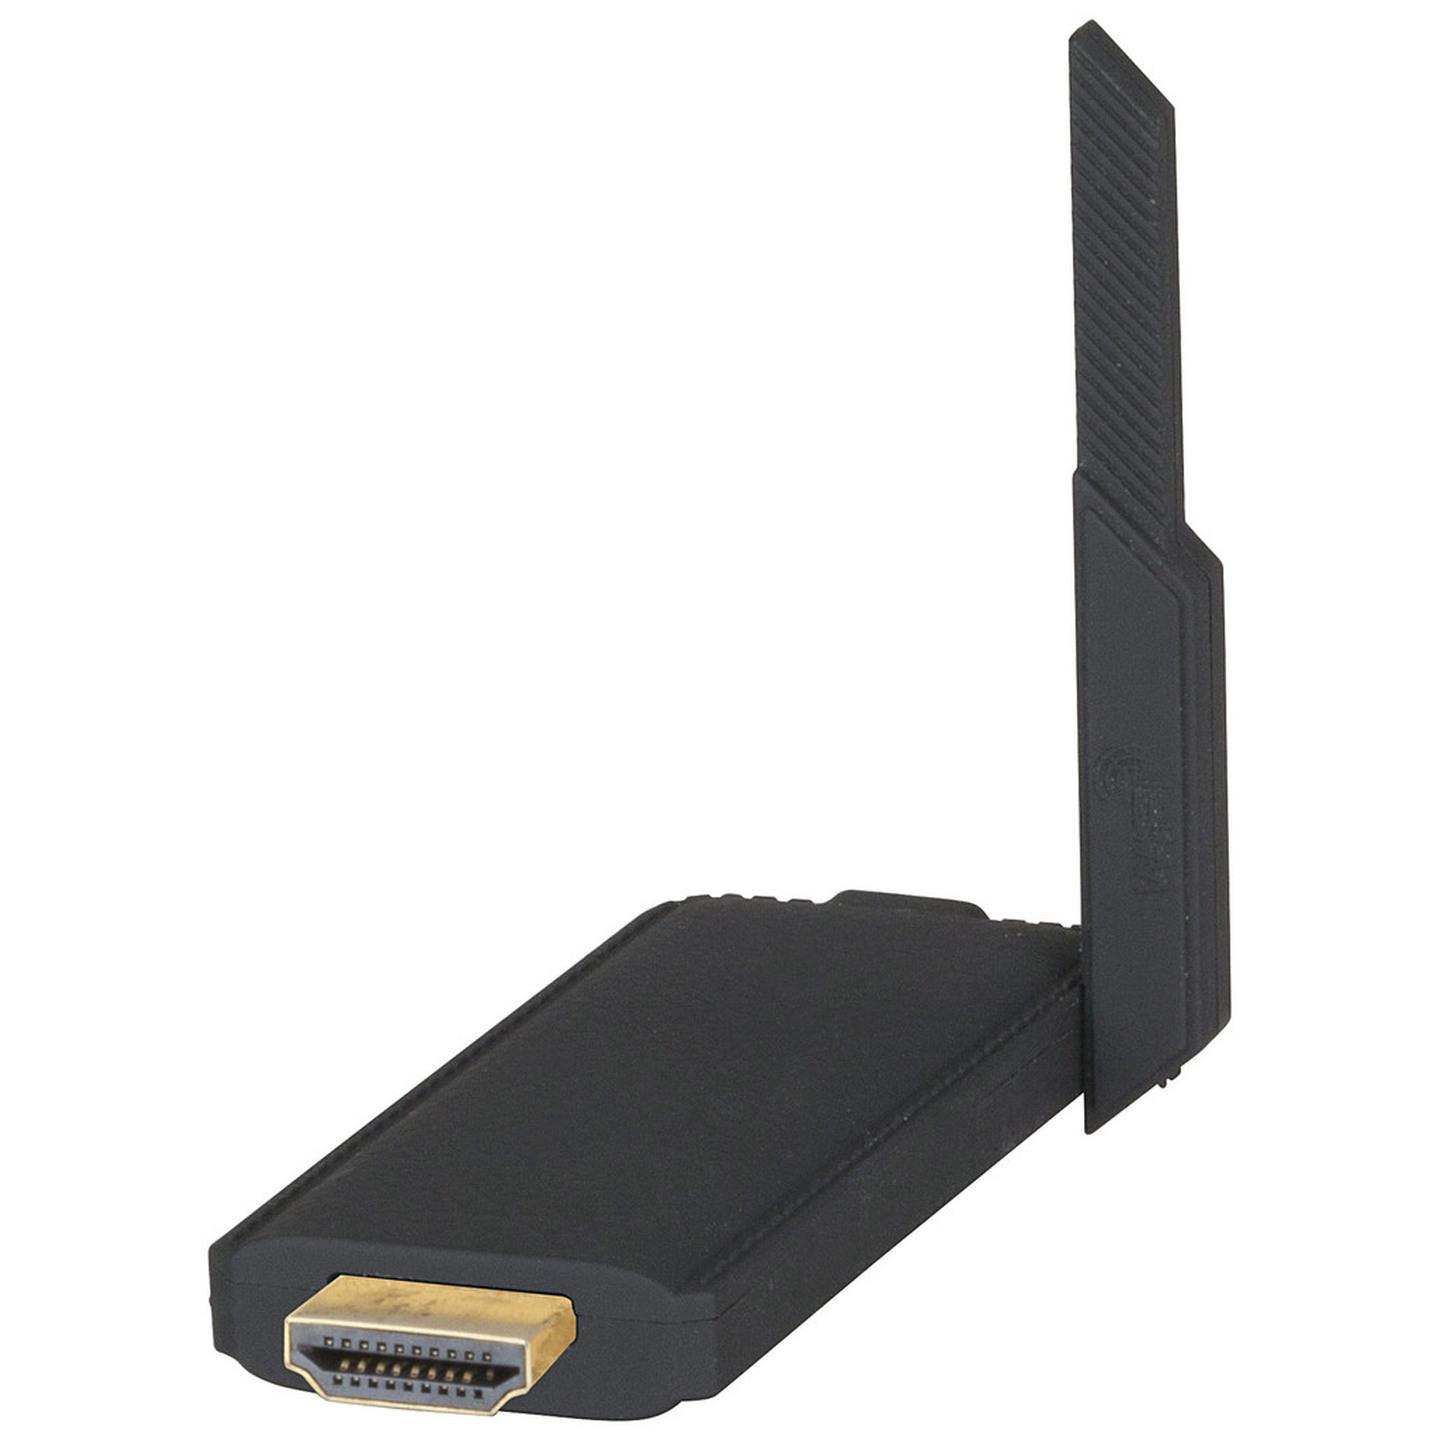 HDMI Wi-Fi Dongle - Miracast/DLNA/Airplay